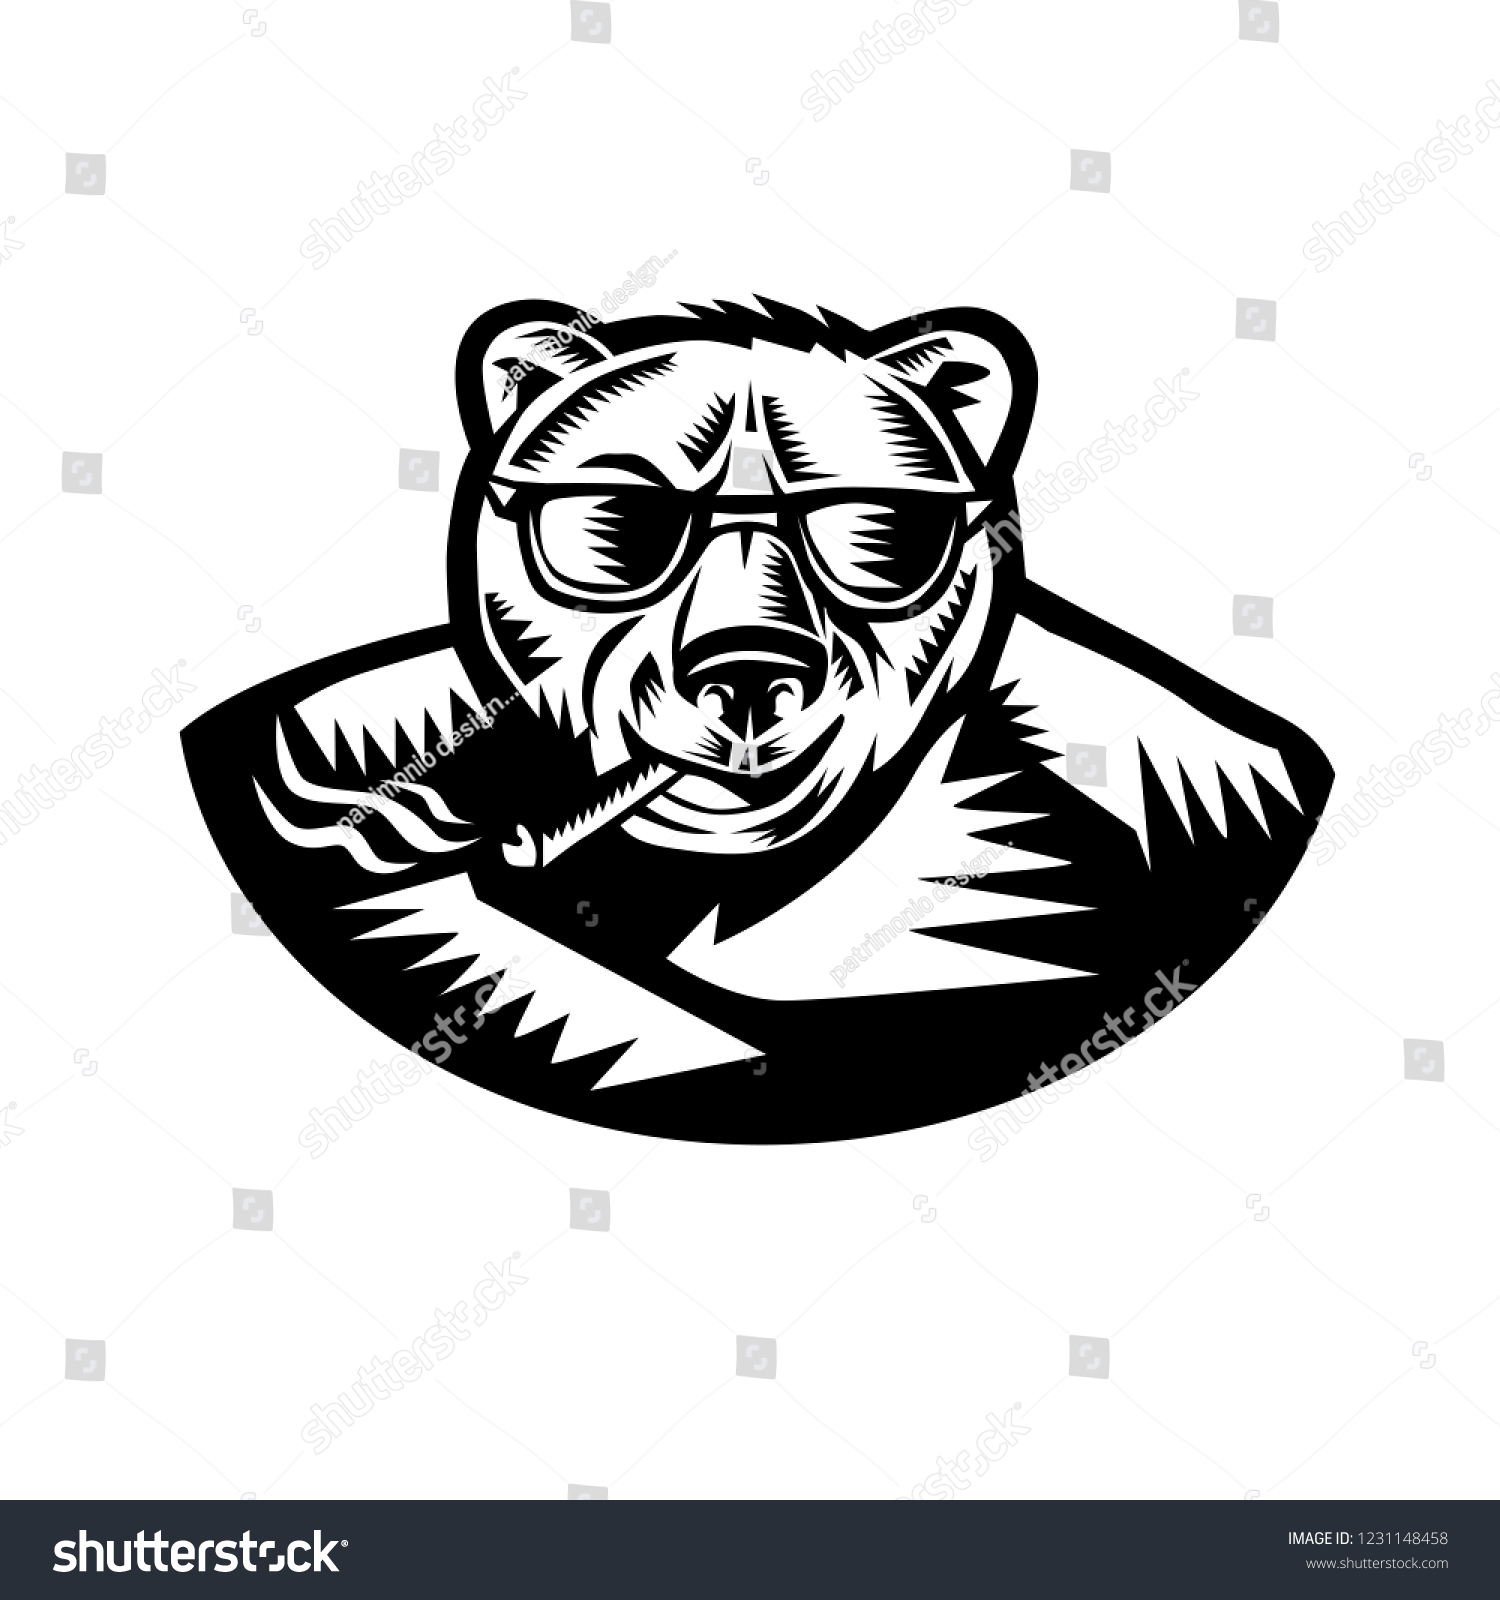 Retro Woodcut Style Illustration Grizzly Bear Stock Vector (Royalty ...